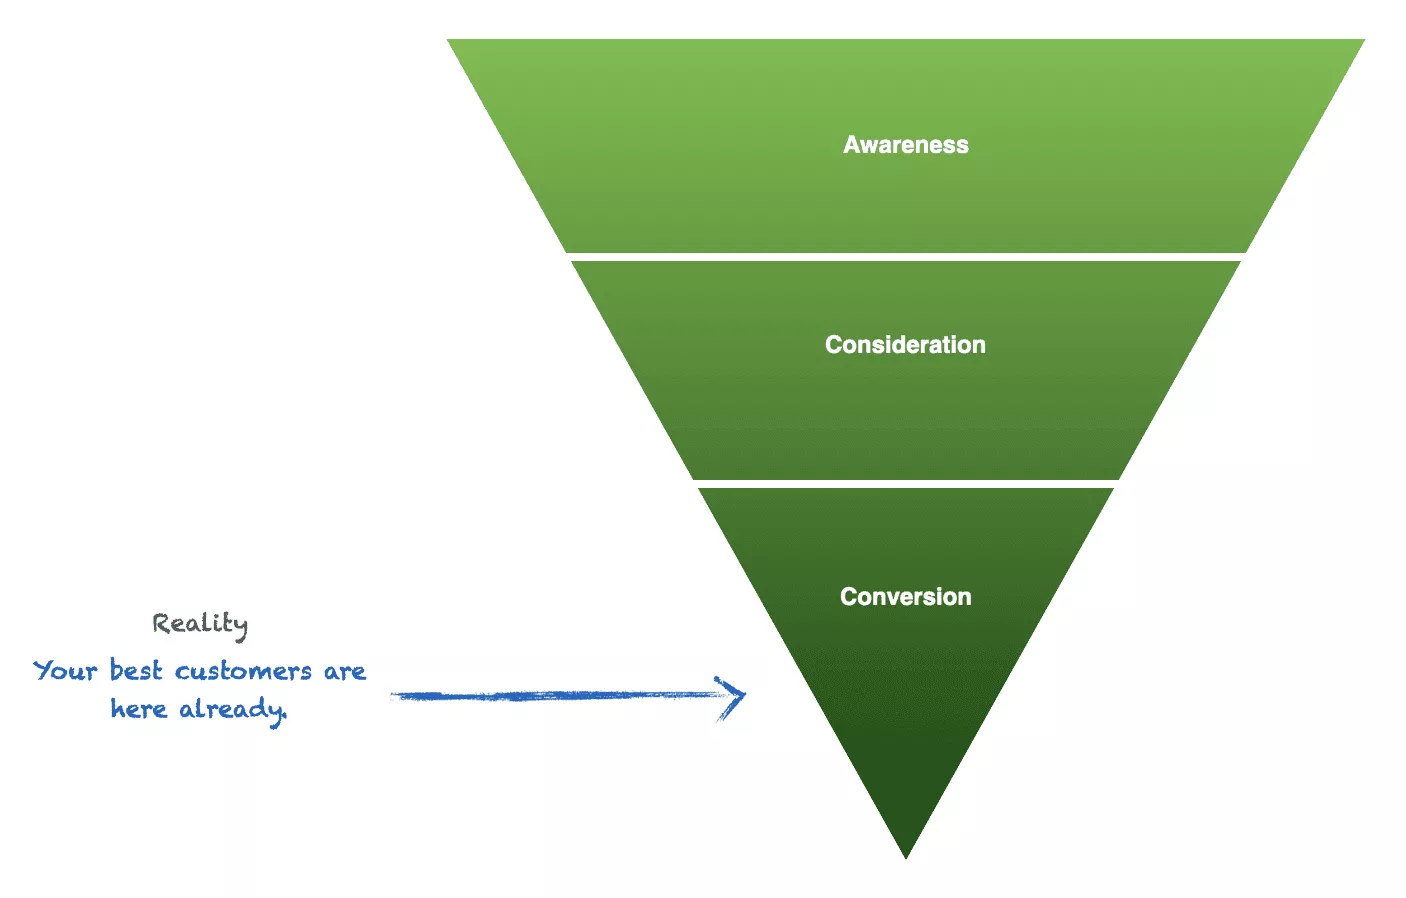 Top Of Funnel, Middle of Funnel, and Bottom of Funnel Content: Awareness, Consideration, and Conversion; Reality is that your best customers are already at the bottom of the funnel.